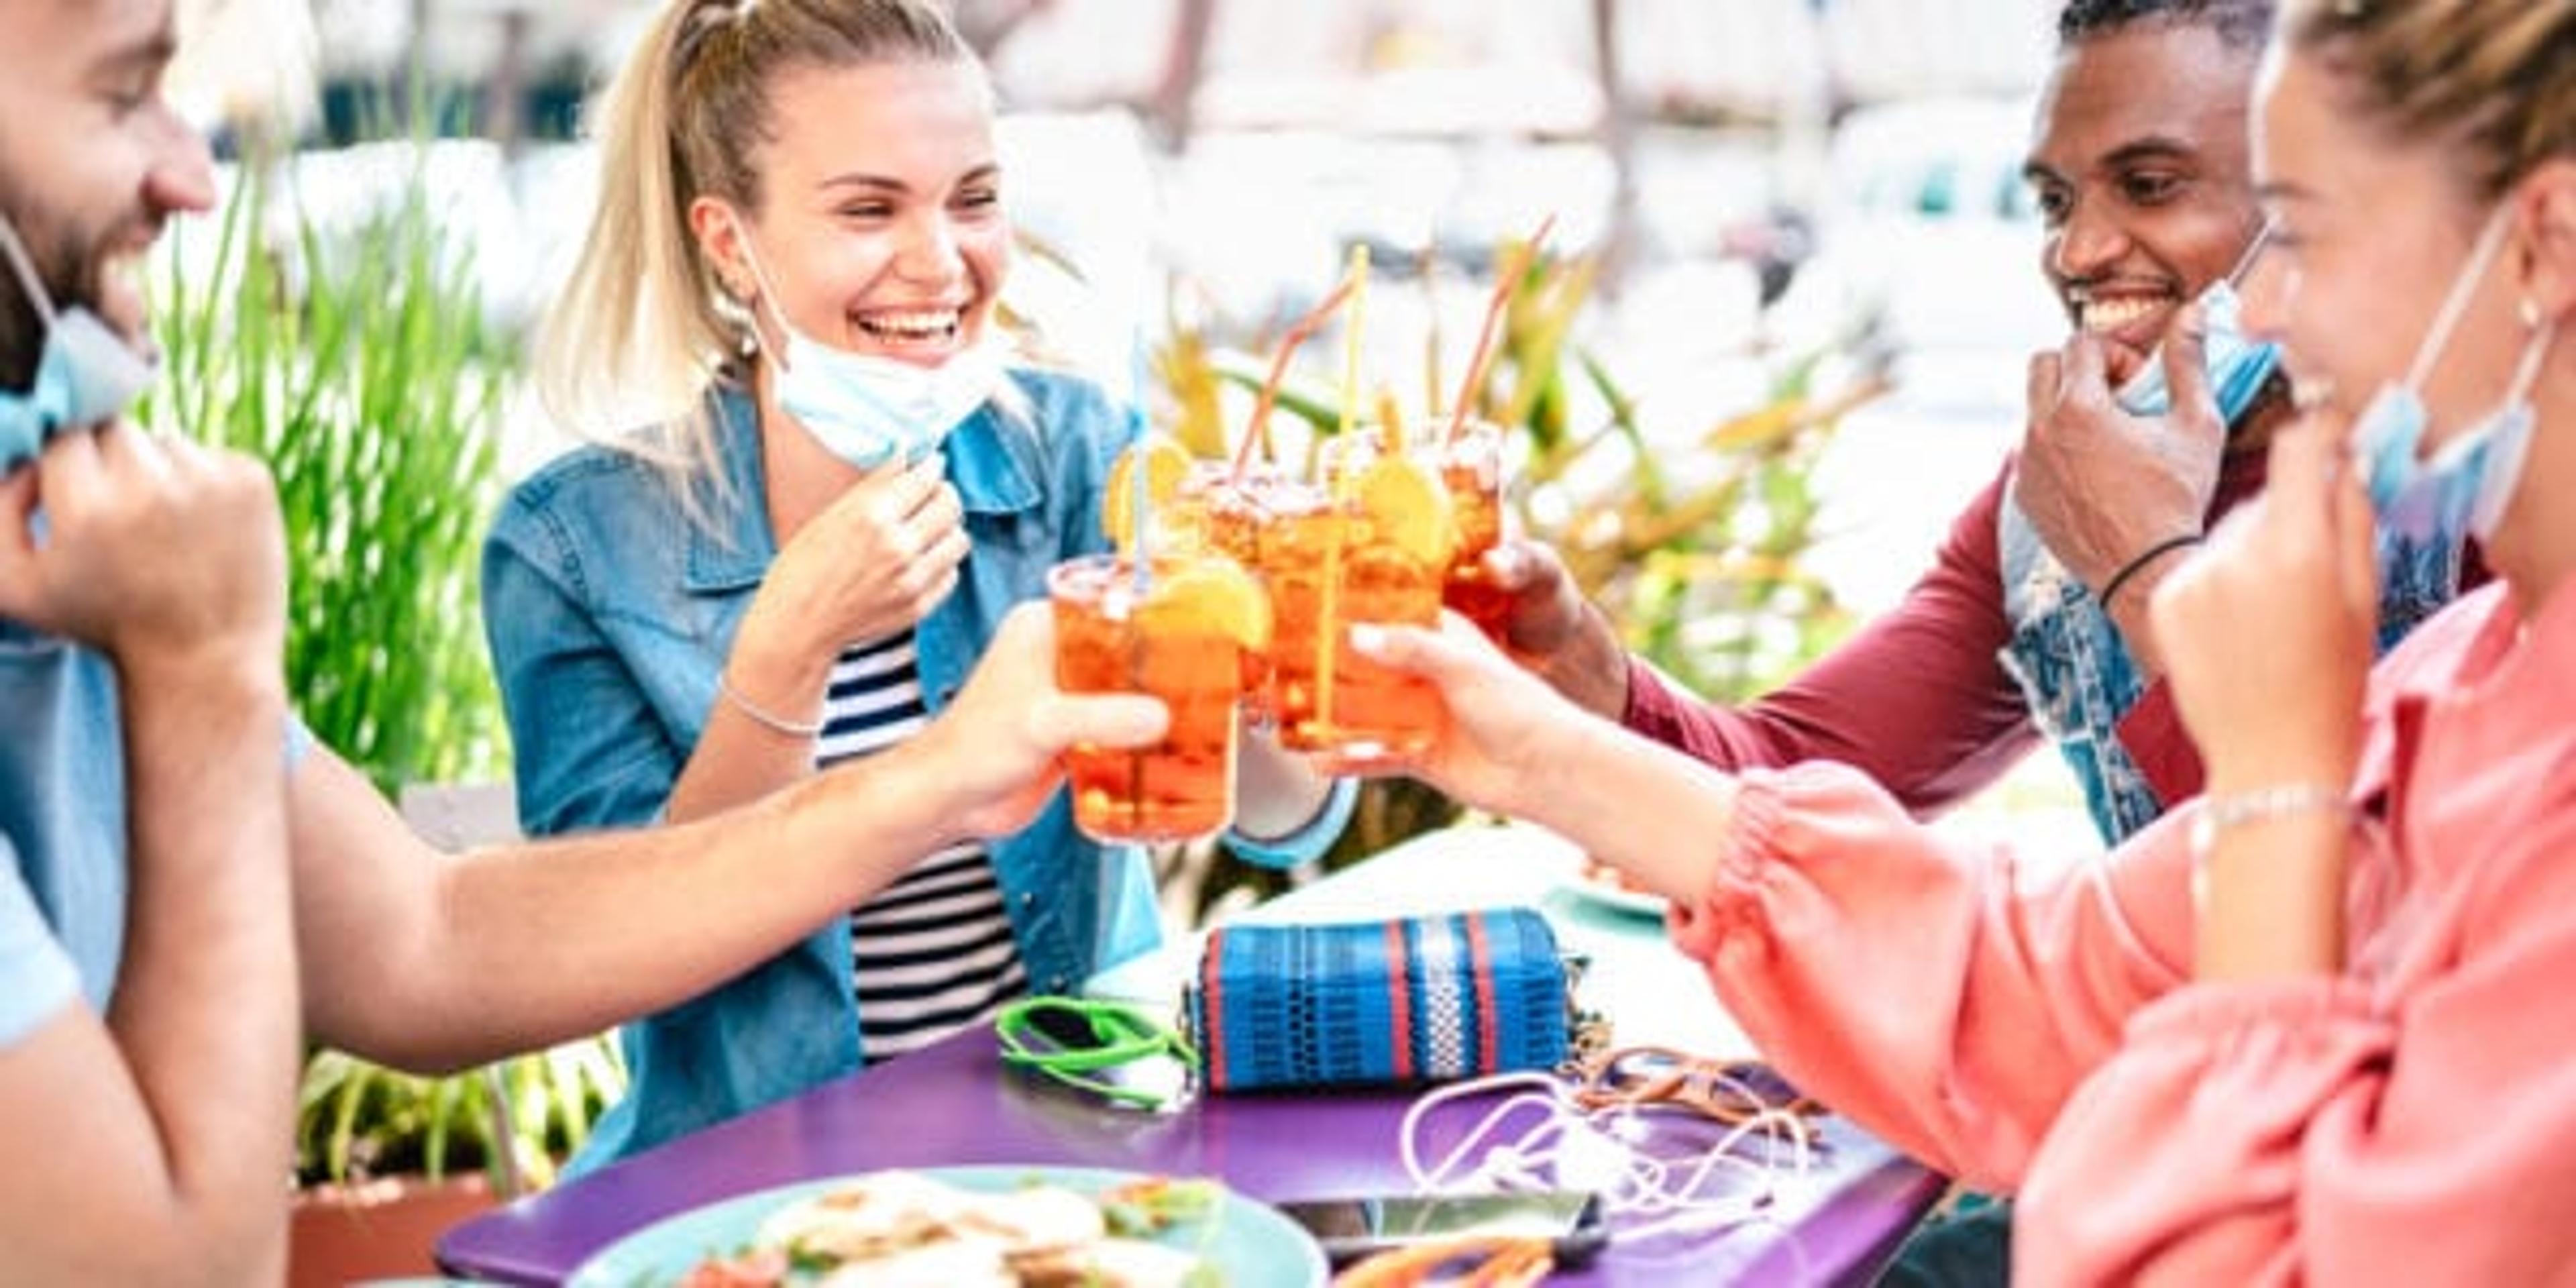 Friends drinking spritz at cocktail bar with face masks - New normal friendship concept with happy people having fun together toasting drinks at restaurant - Bright filter with focus on left woman